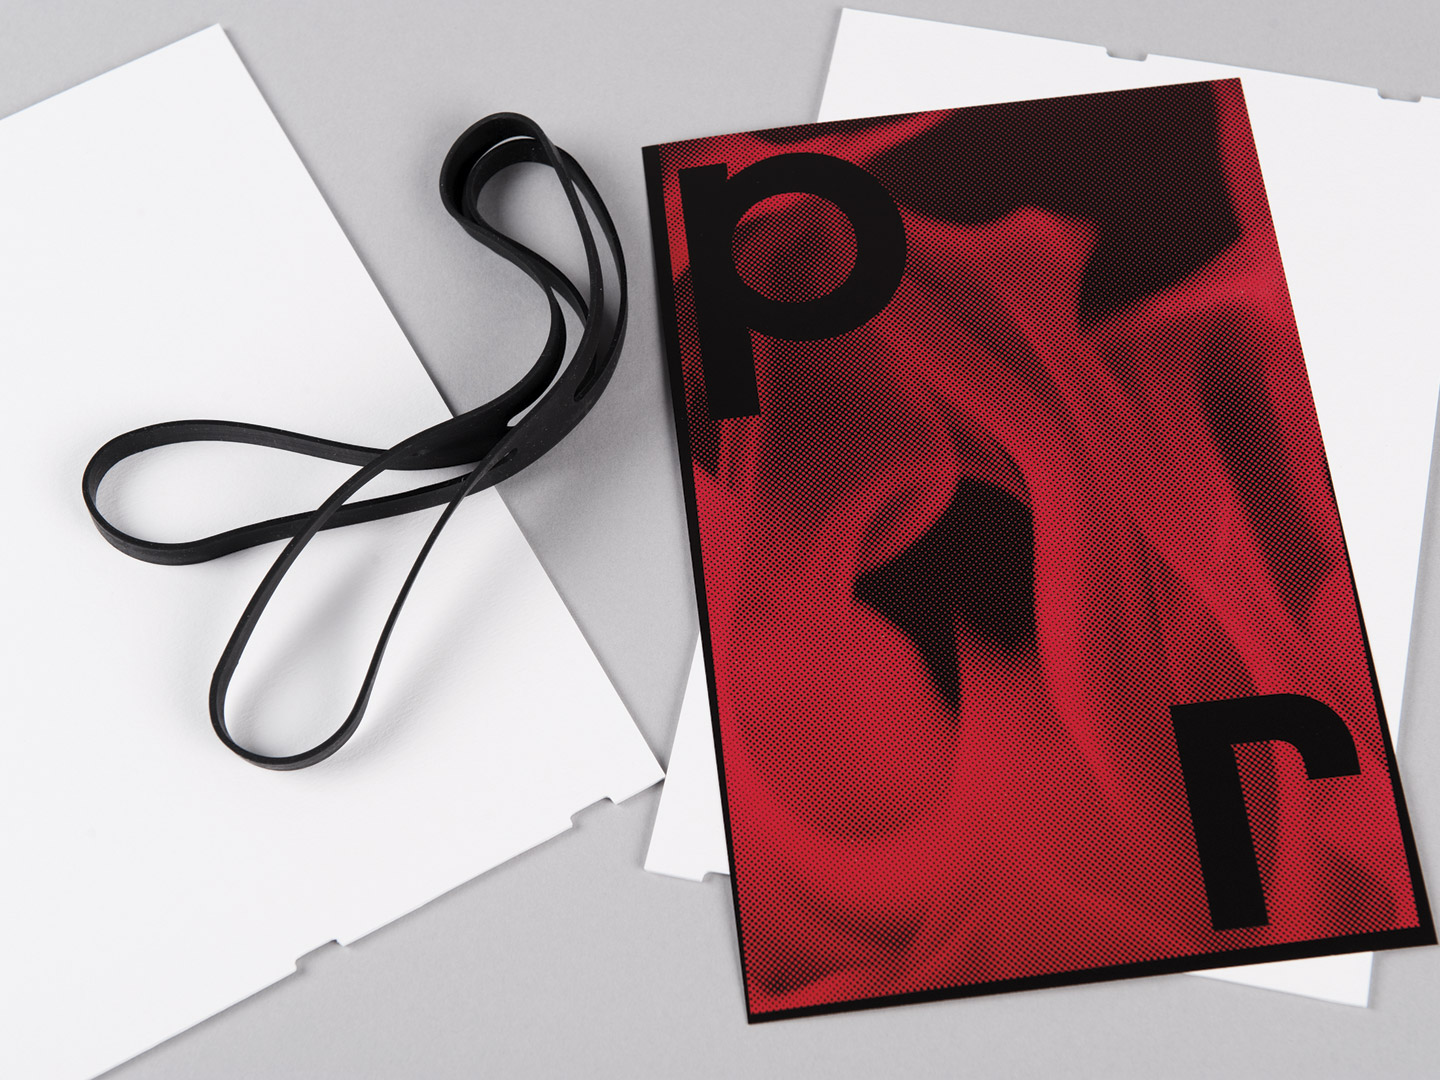 Brand identity and print for French fashion label Paco Rabanne by Zak Group, United Kingdom